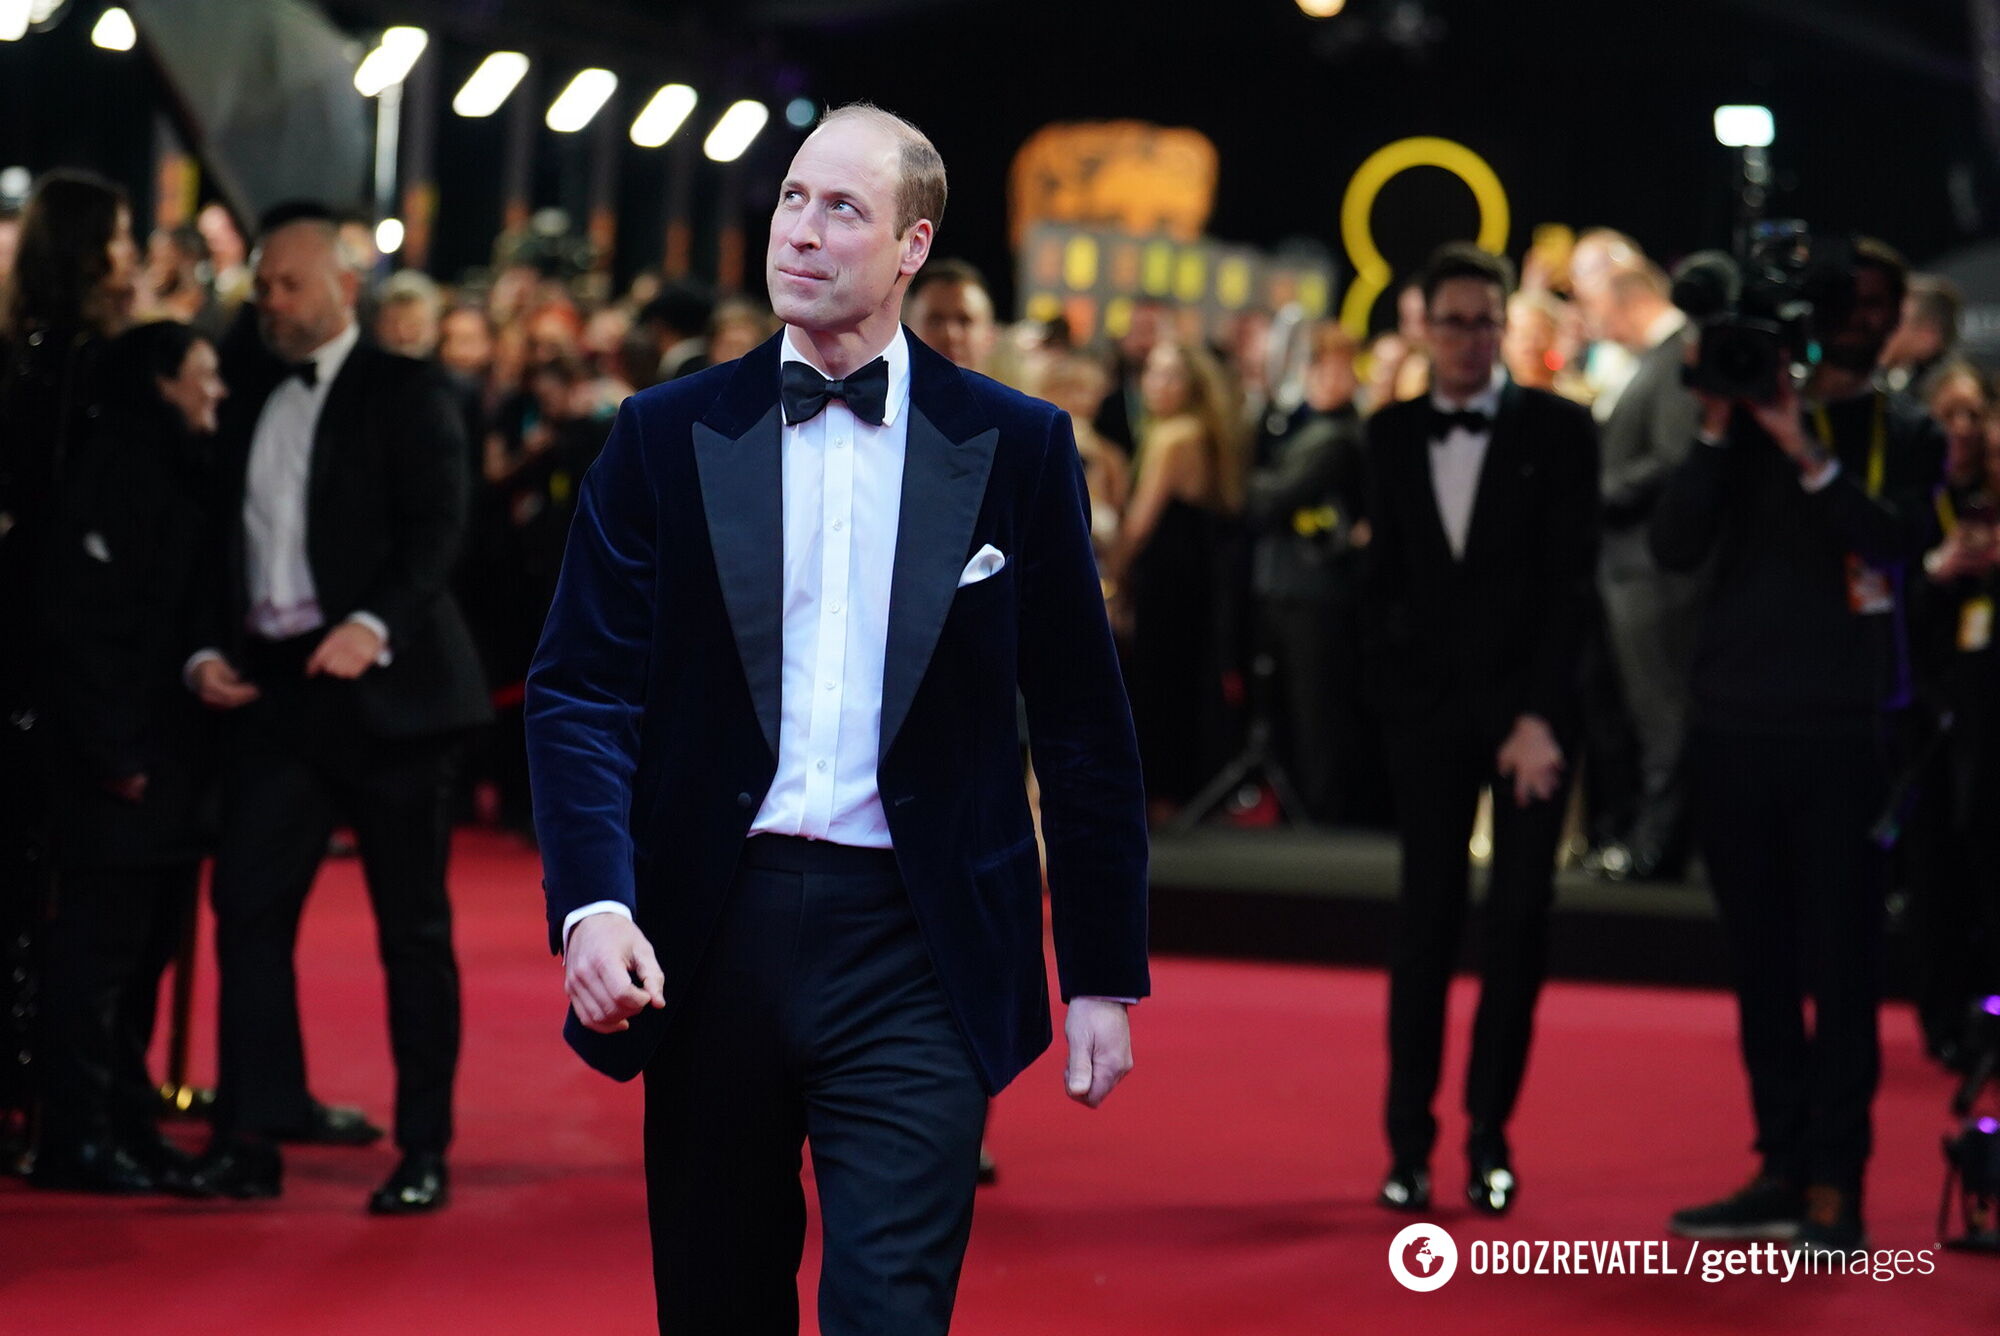 Prince William attended the BAFTAs without Kate Middleton for the first time since 2017. Photo